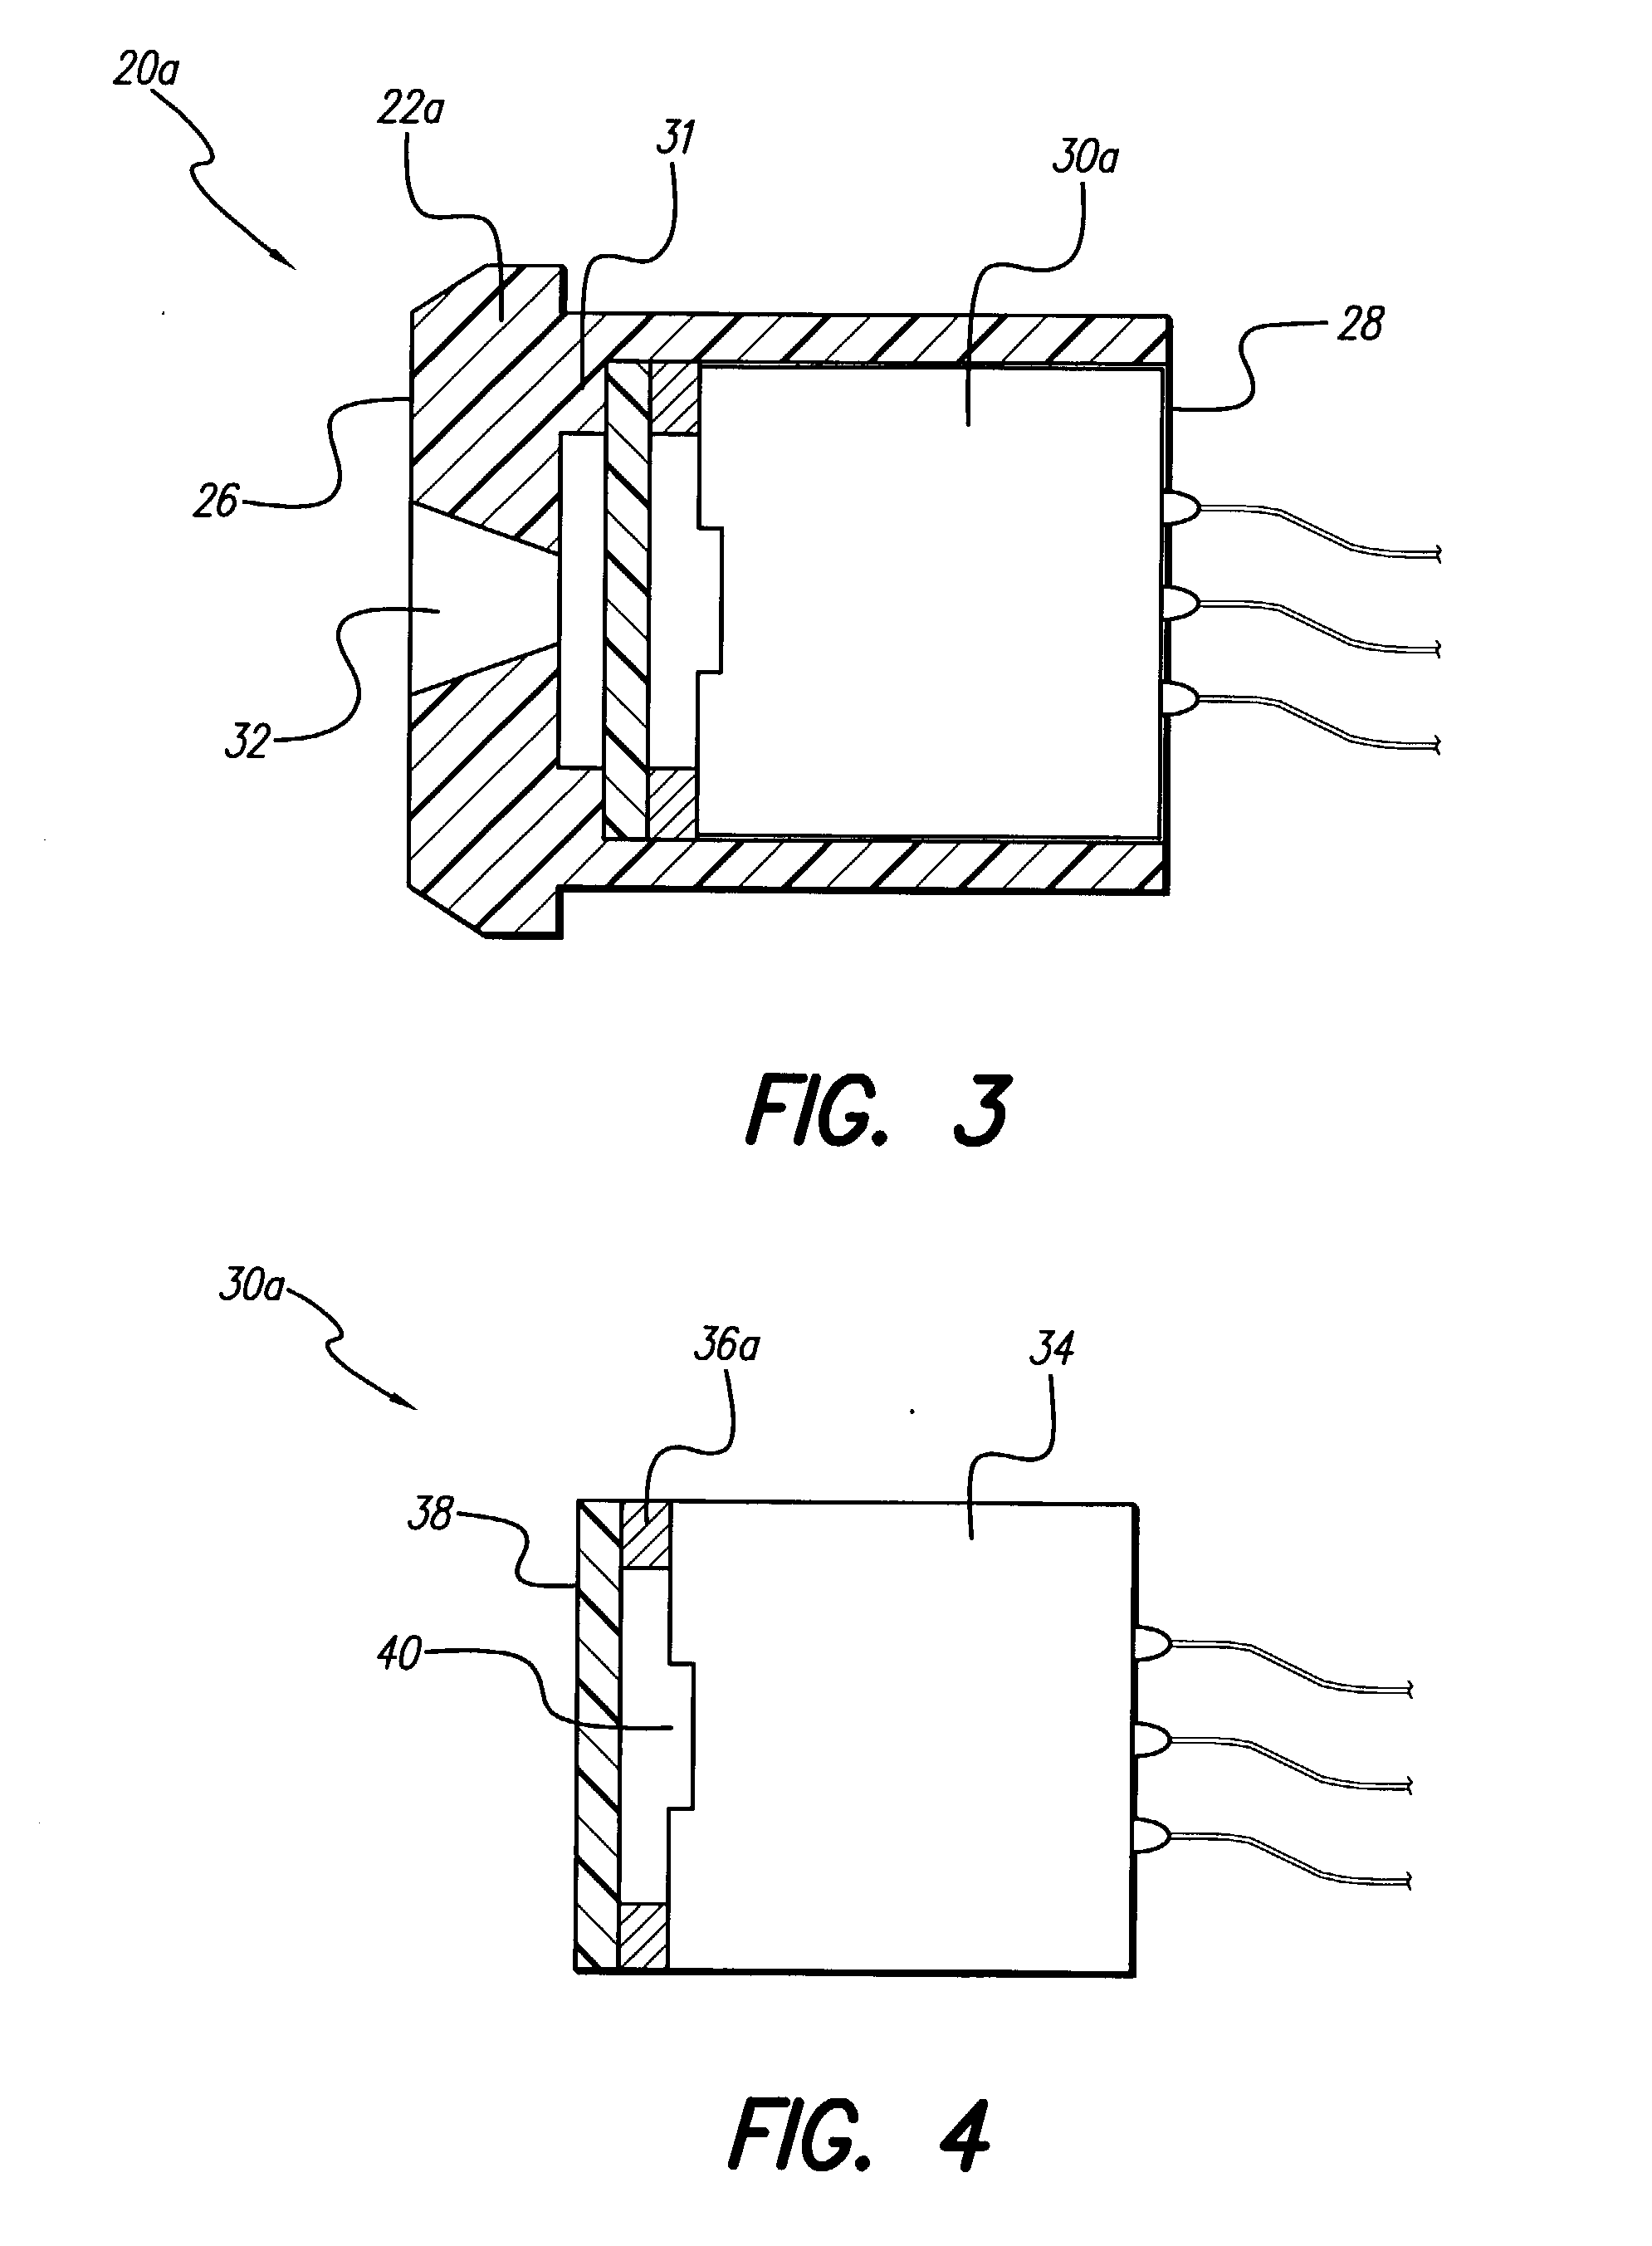 Small water-repellant microphone having improved acoustic performance and method of constructing same